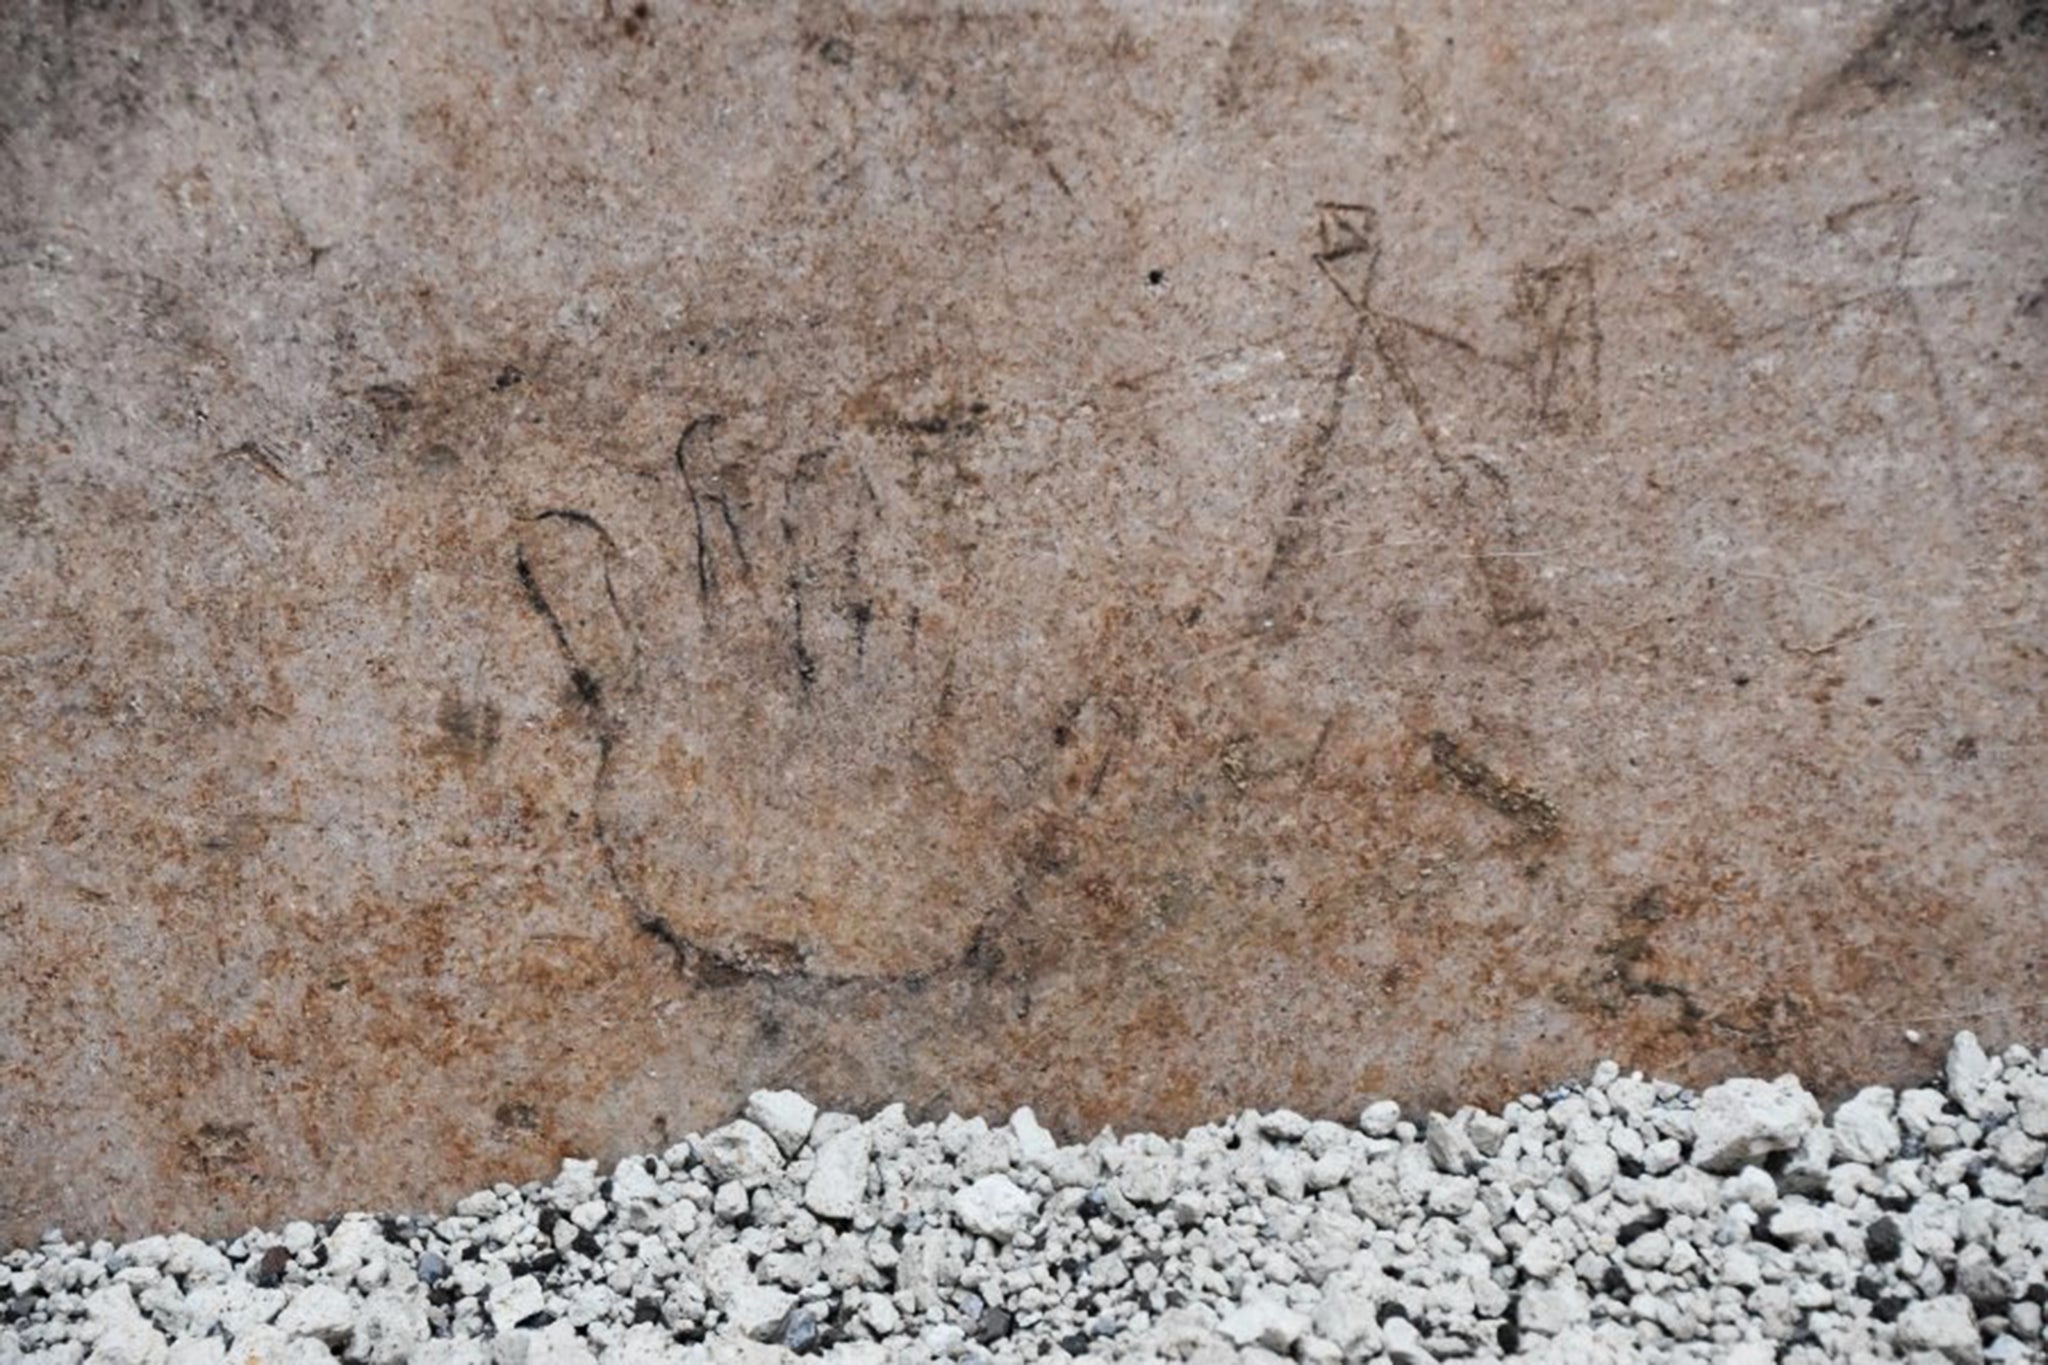 Cave drawing of a small hand (left) and human figures (right) uncovered in Pompeii